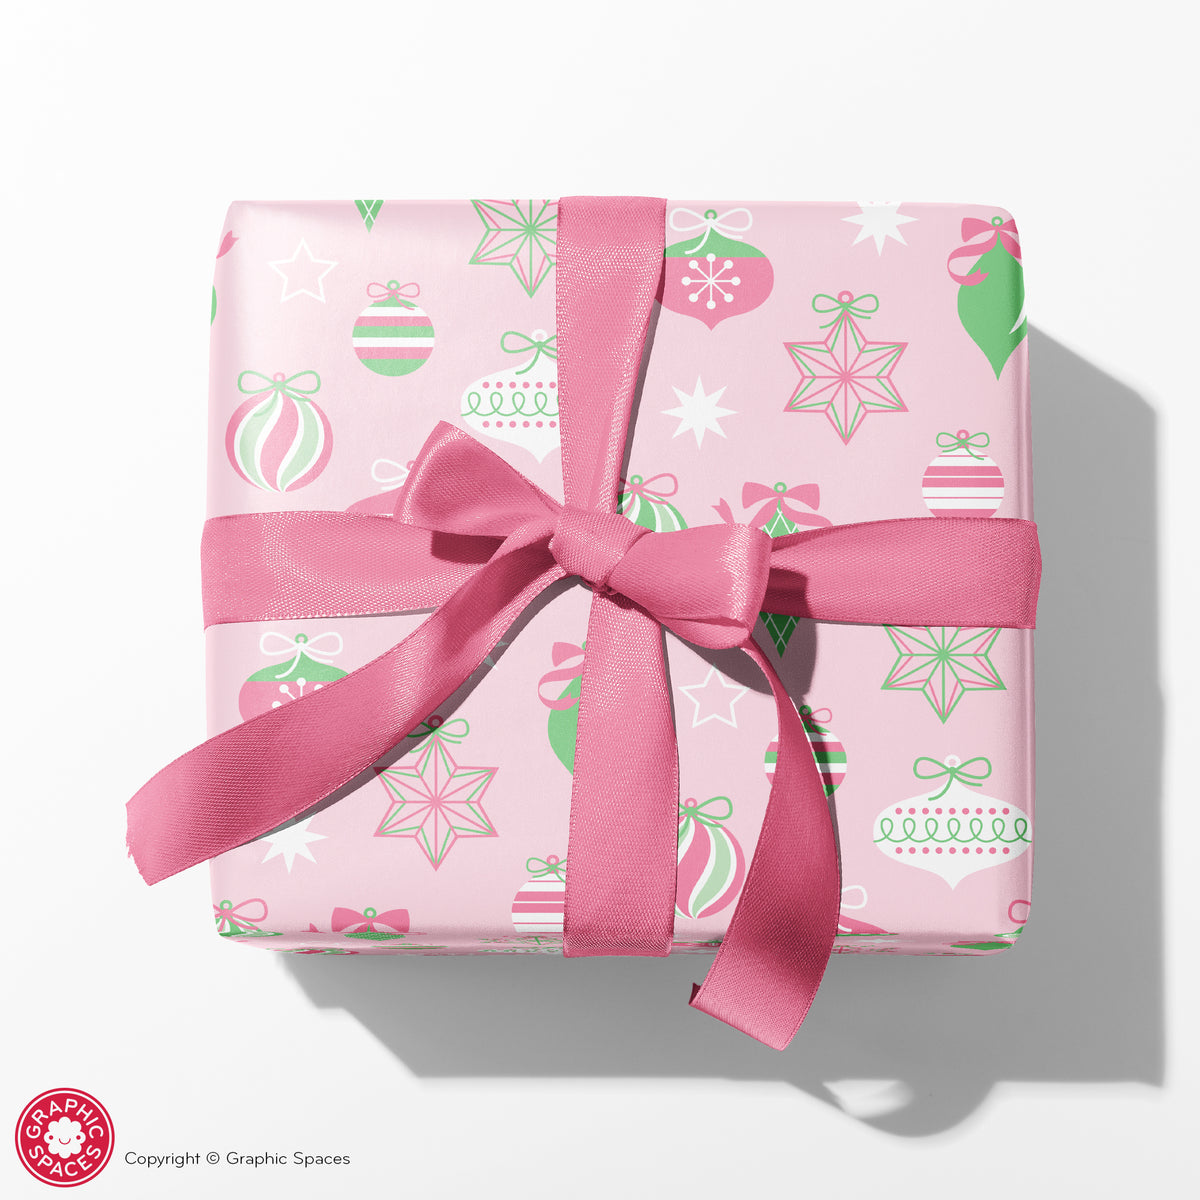 Retro Ornament Christmas Wrapping Paper - PINK